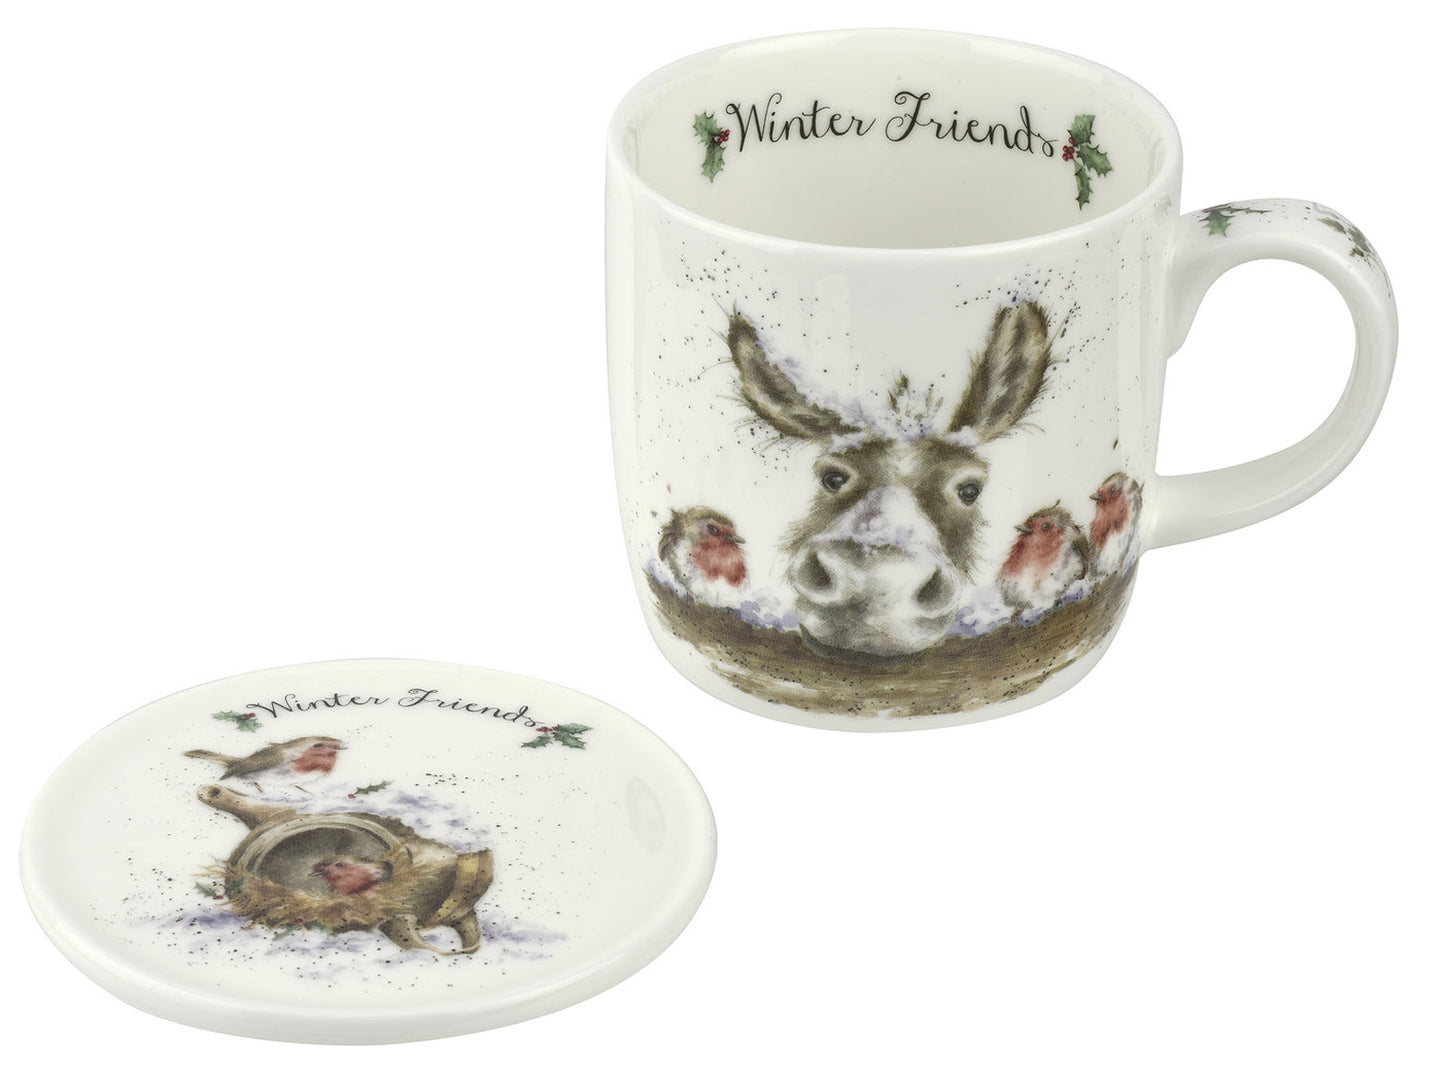 A matching mug and coaster set with a donkey on the mug surrounded by robins, which are also on the coaster